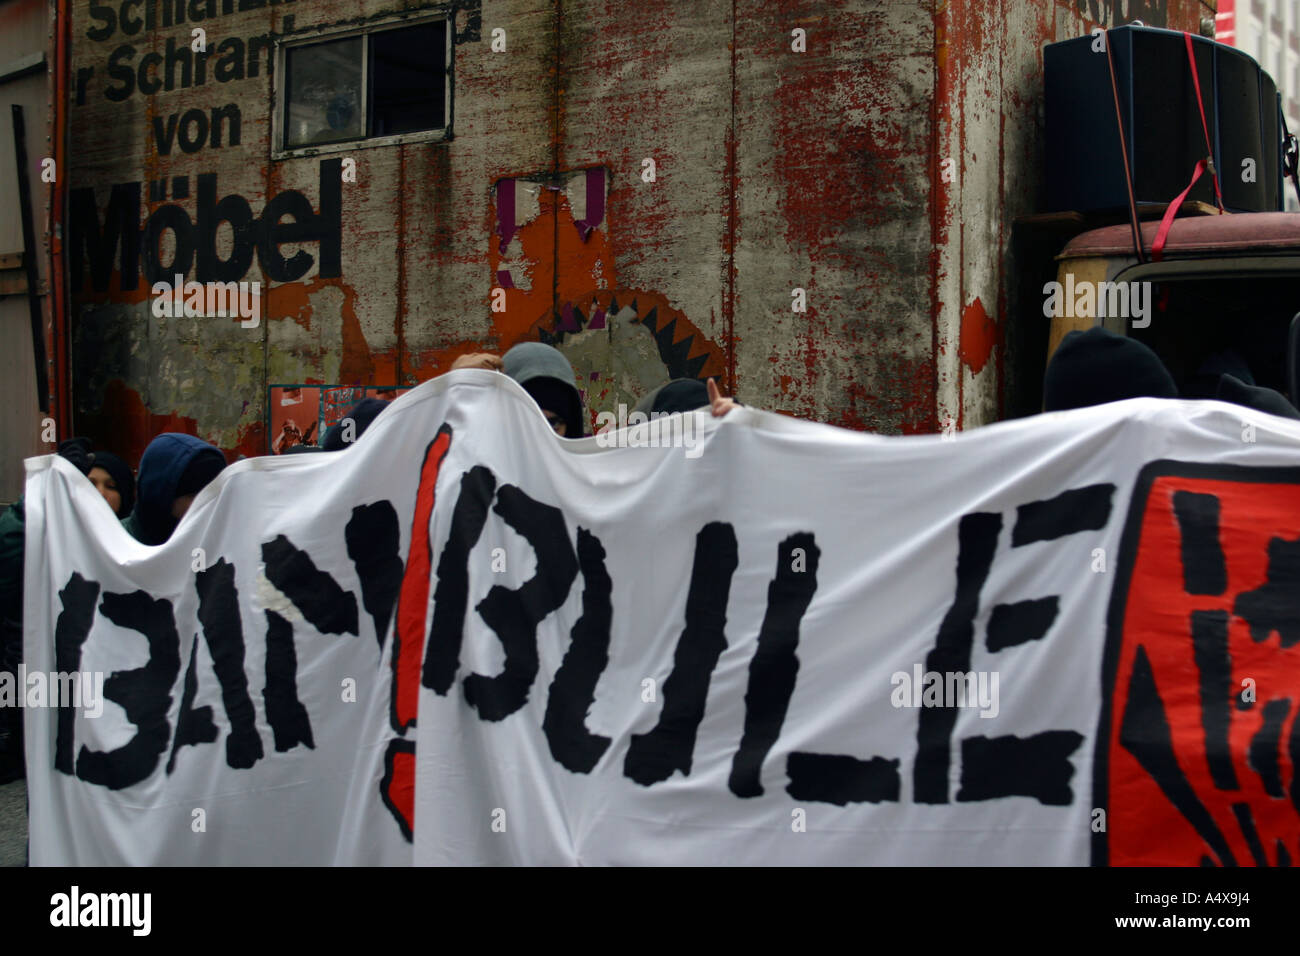 Bambule demonstration in Hamburg for resistance in the City, Against right-wing Populism Exclusion and Expulsion Stock Photo